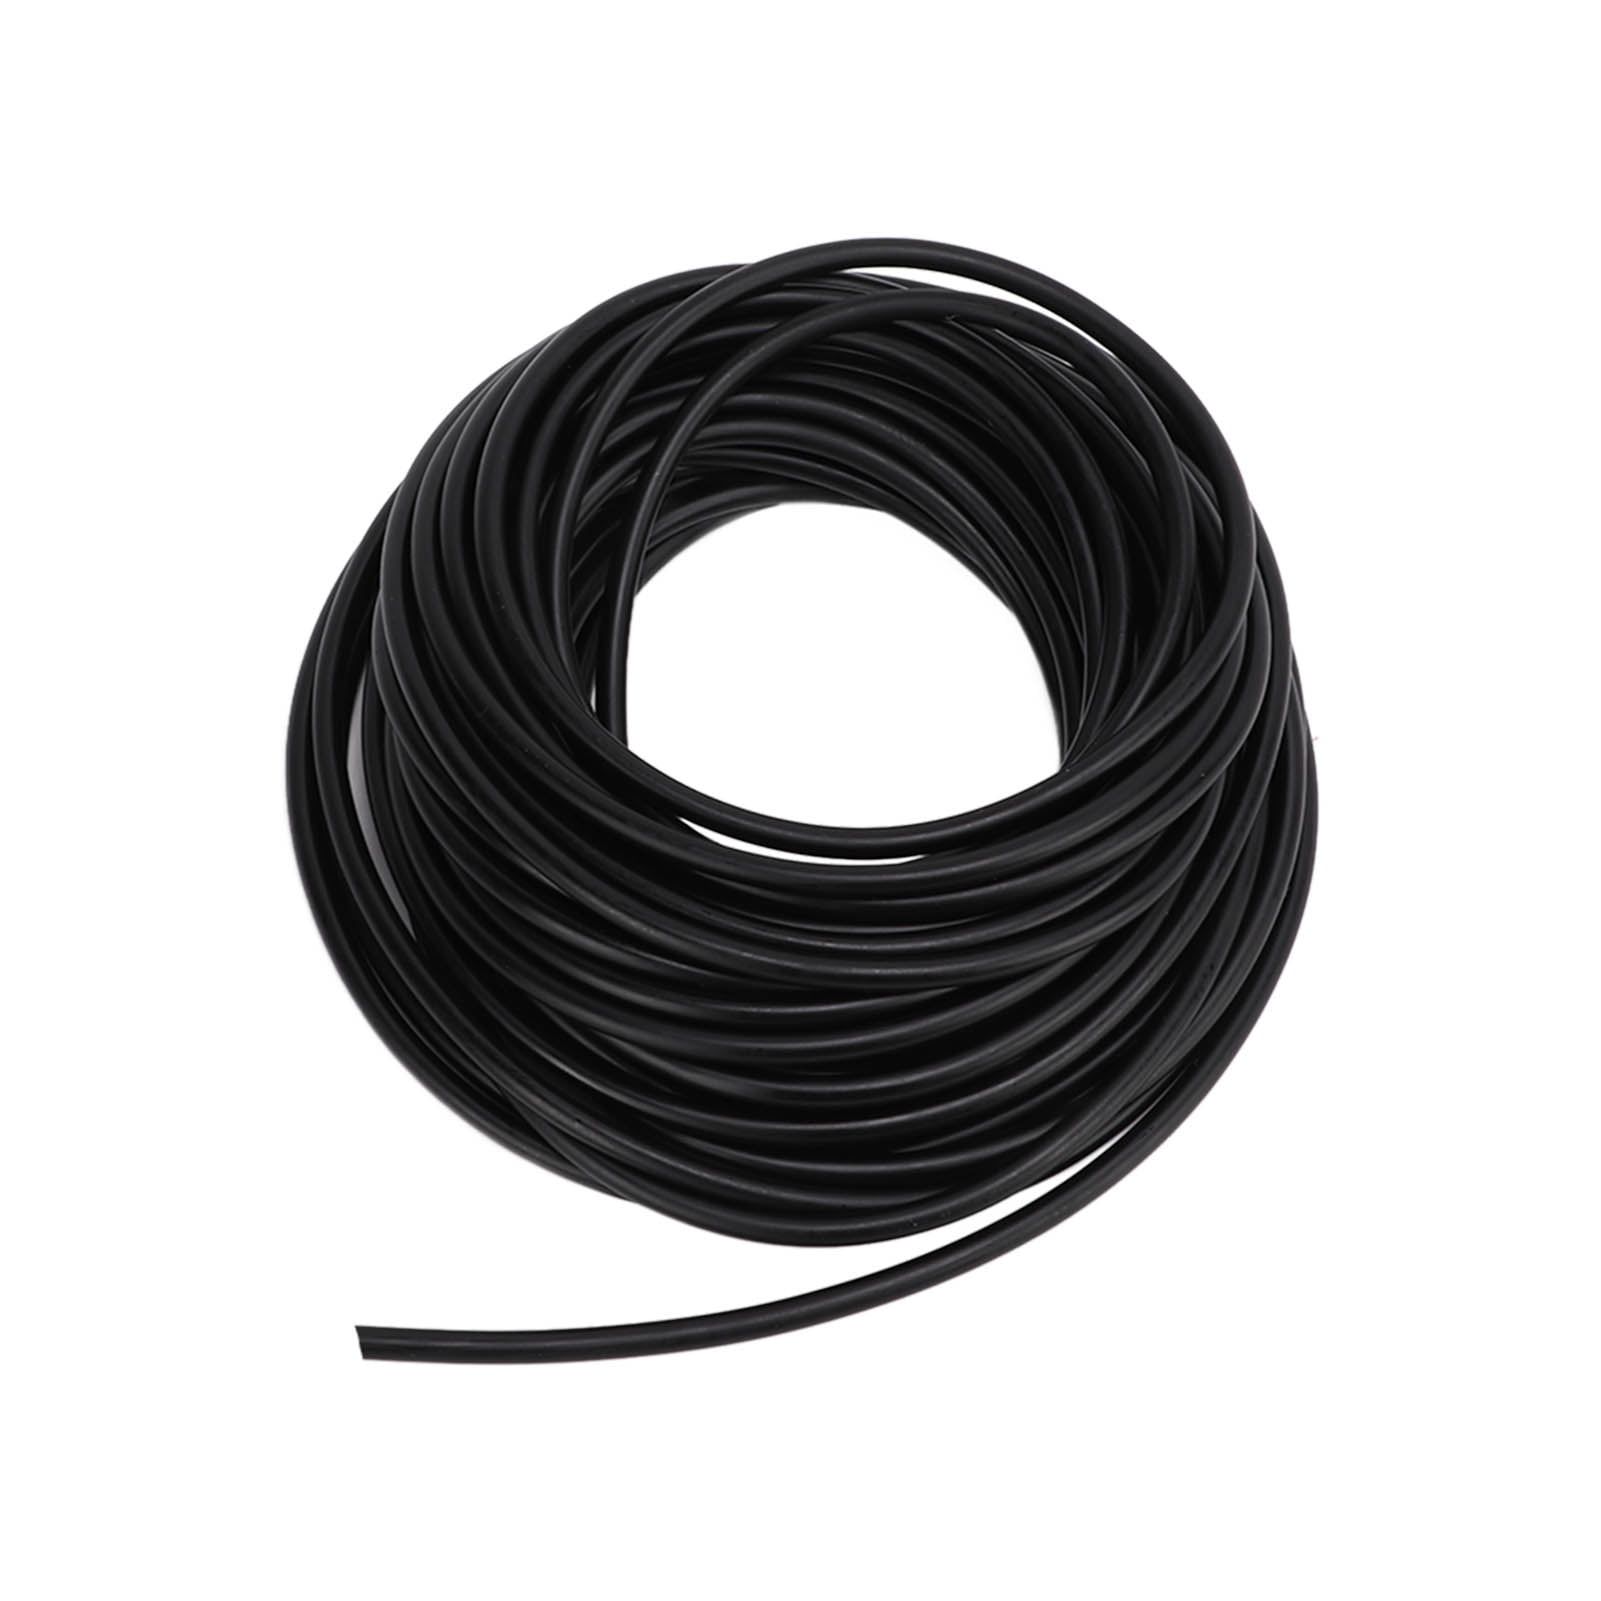 10 ft long natural rubber latex surgical tubing 1/8" ID sling shot 1/32" wall 